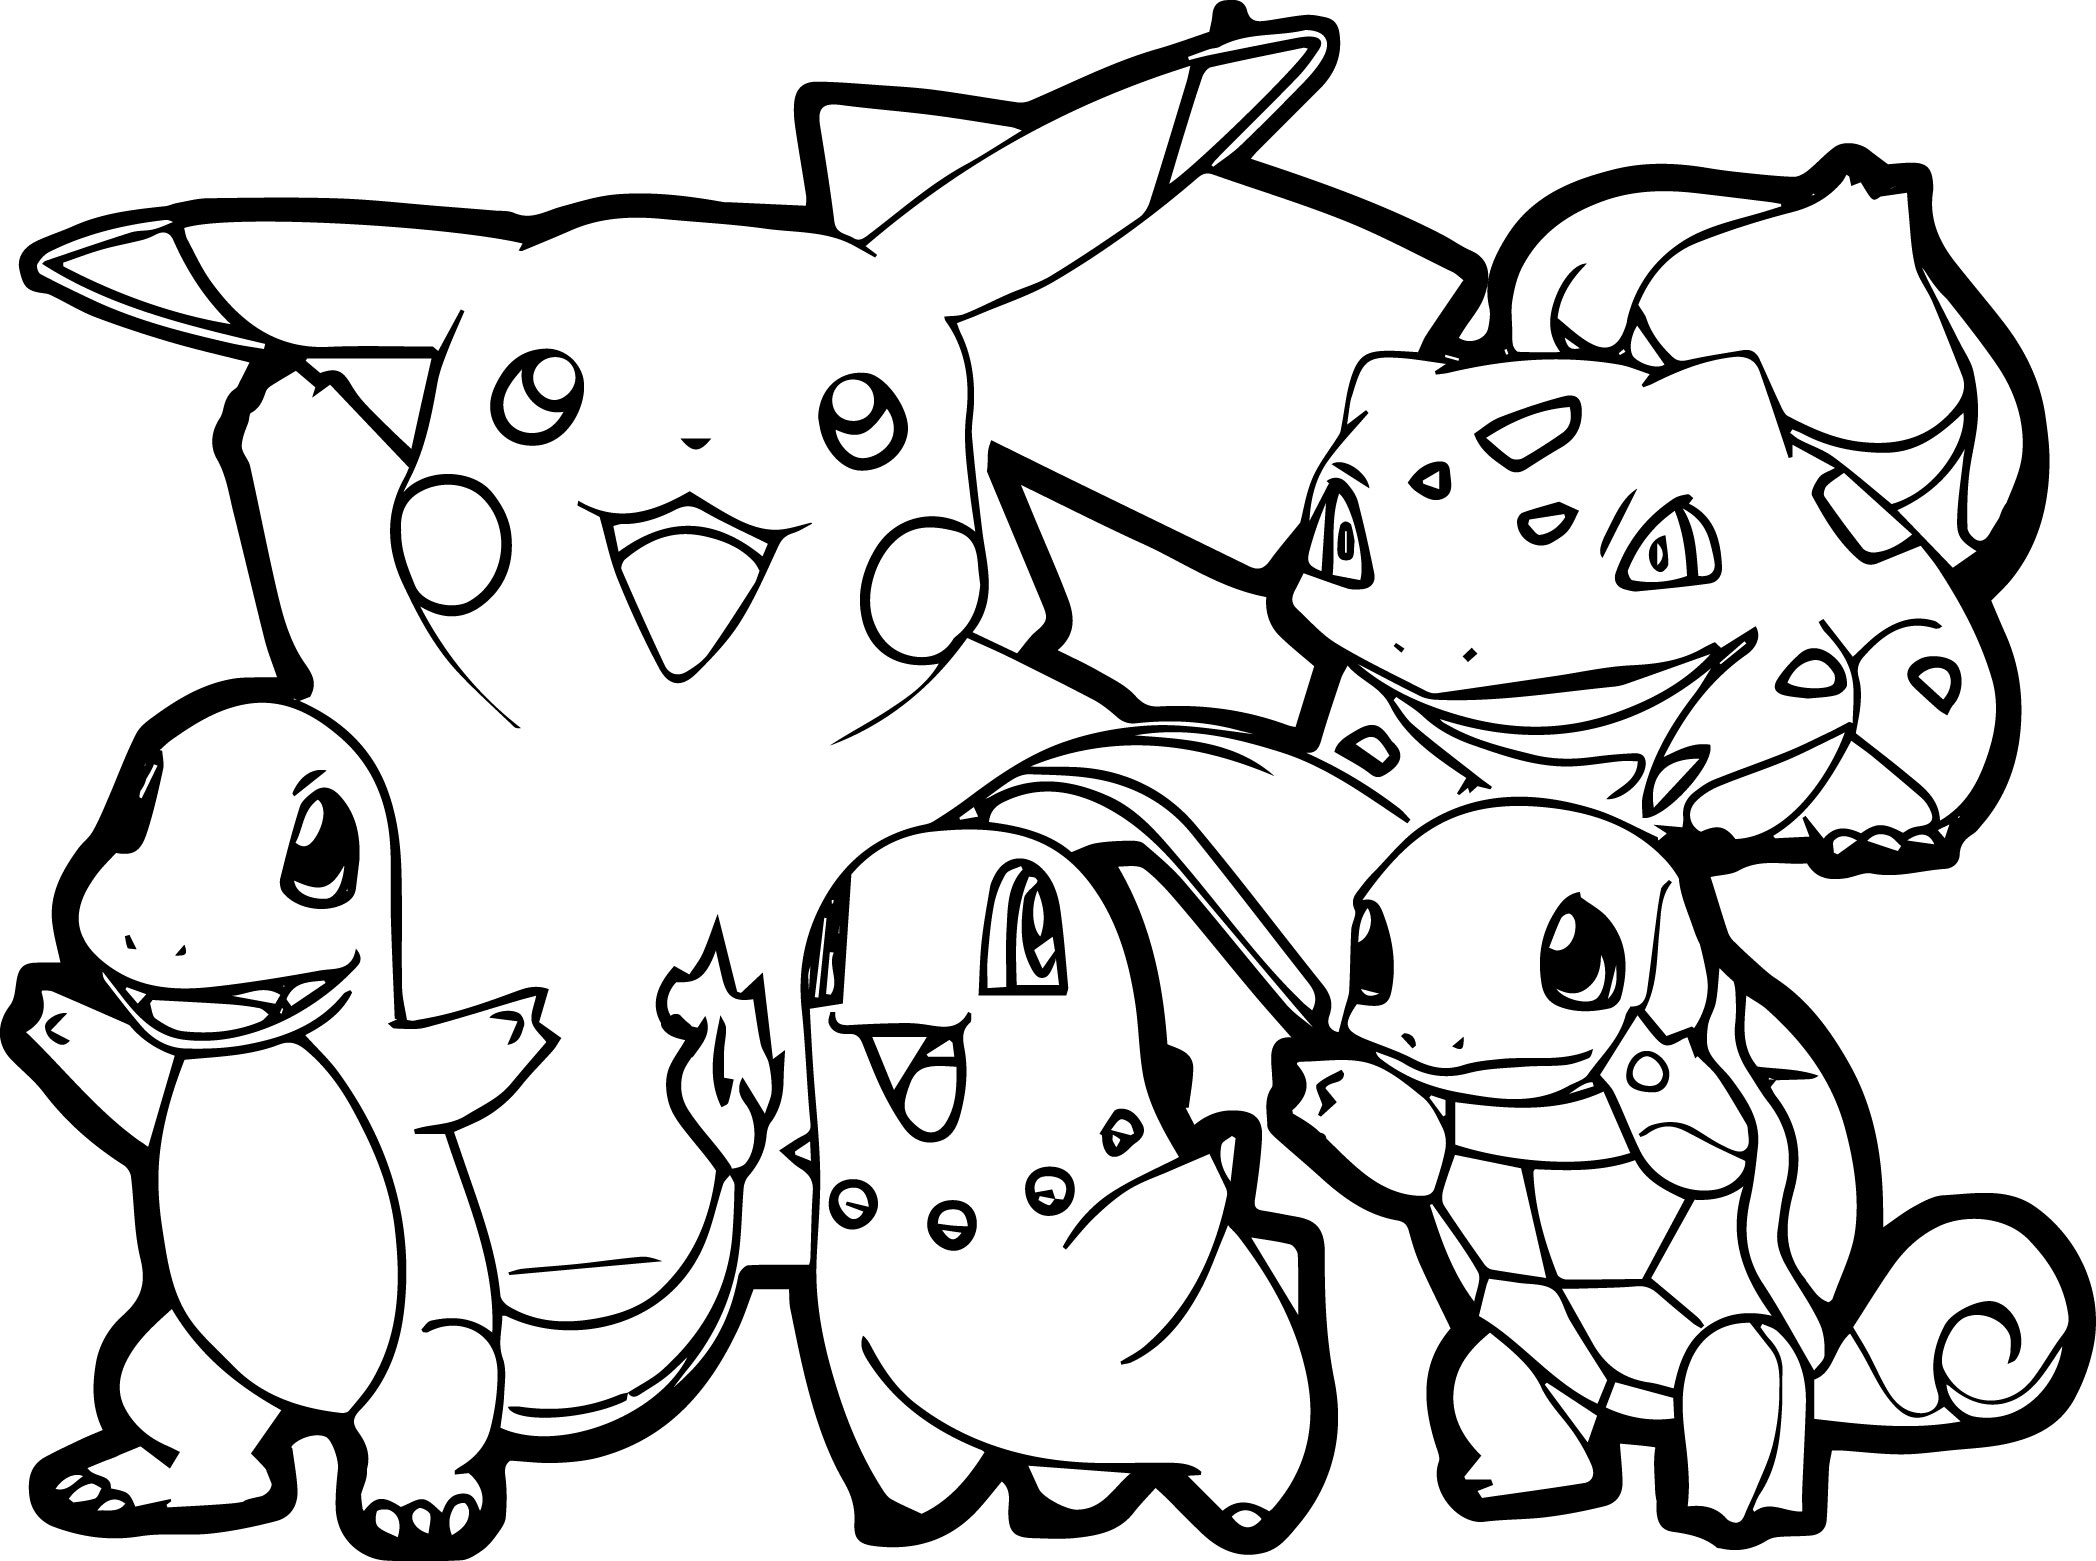 Coloring pages coloring for kids pokemon